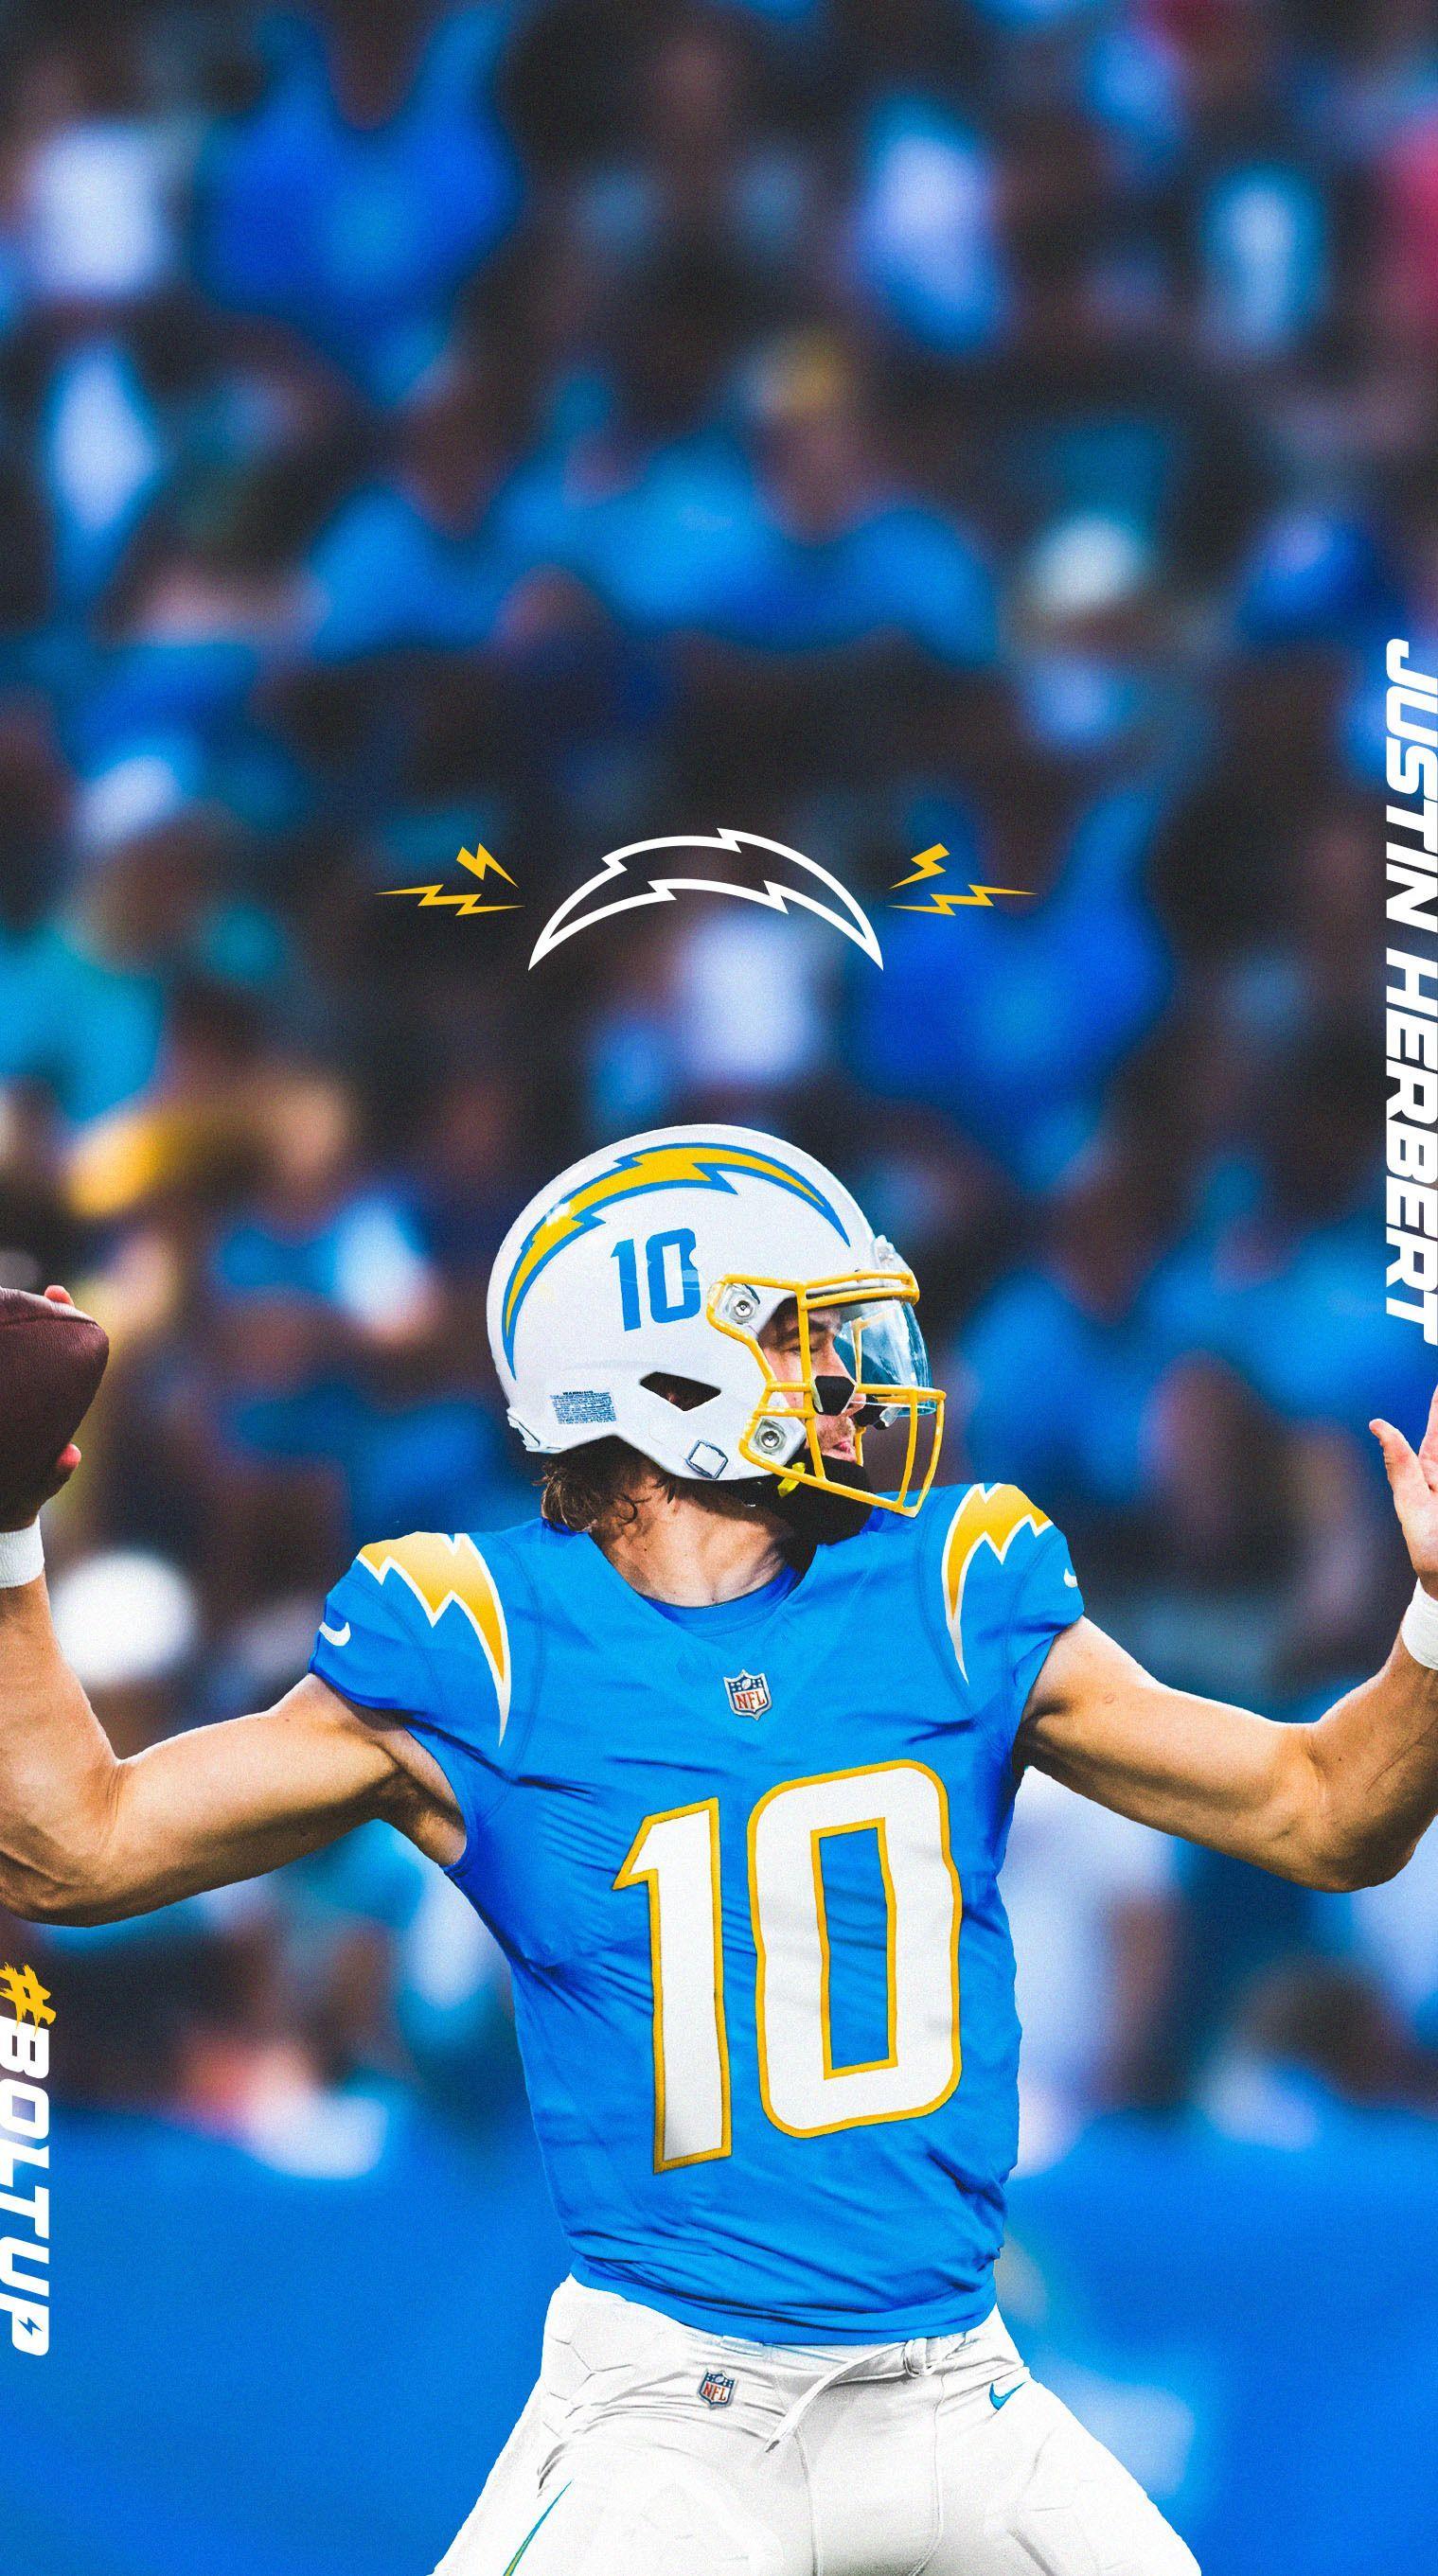 Los Angeles Chargers wallpaper  Los angeles chargers Chargers football  La chargers logo